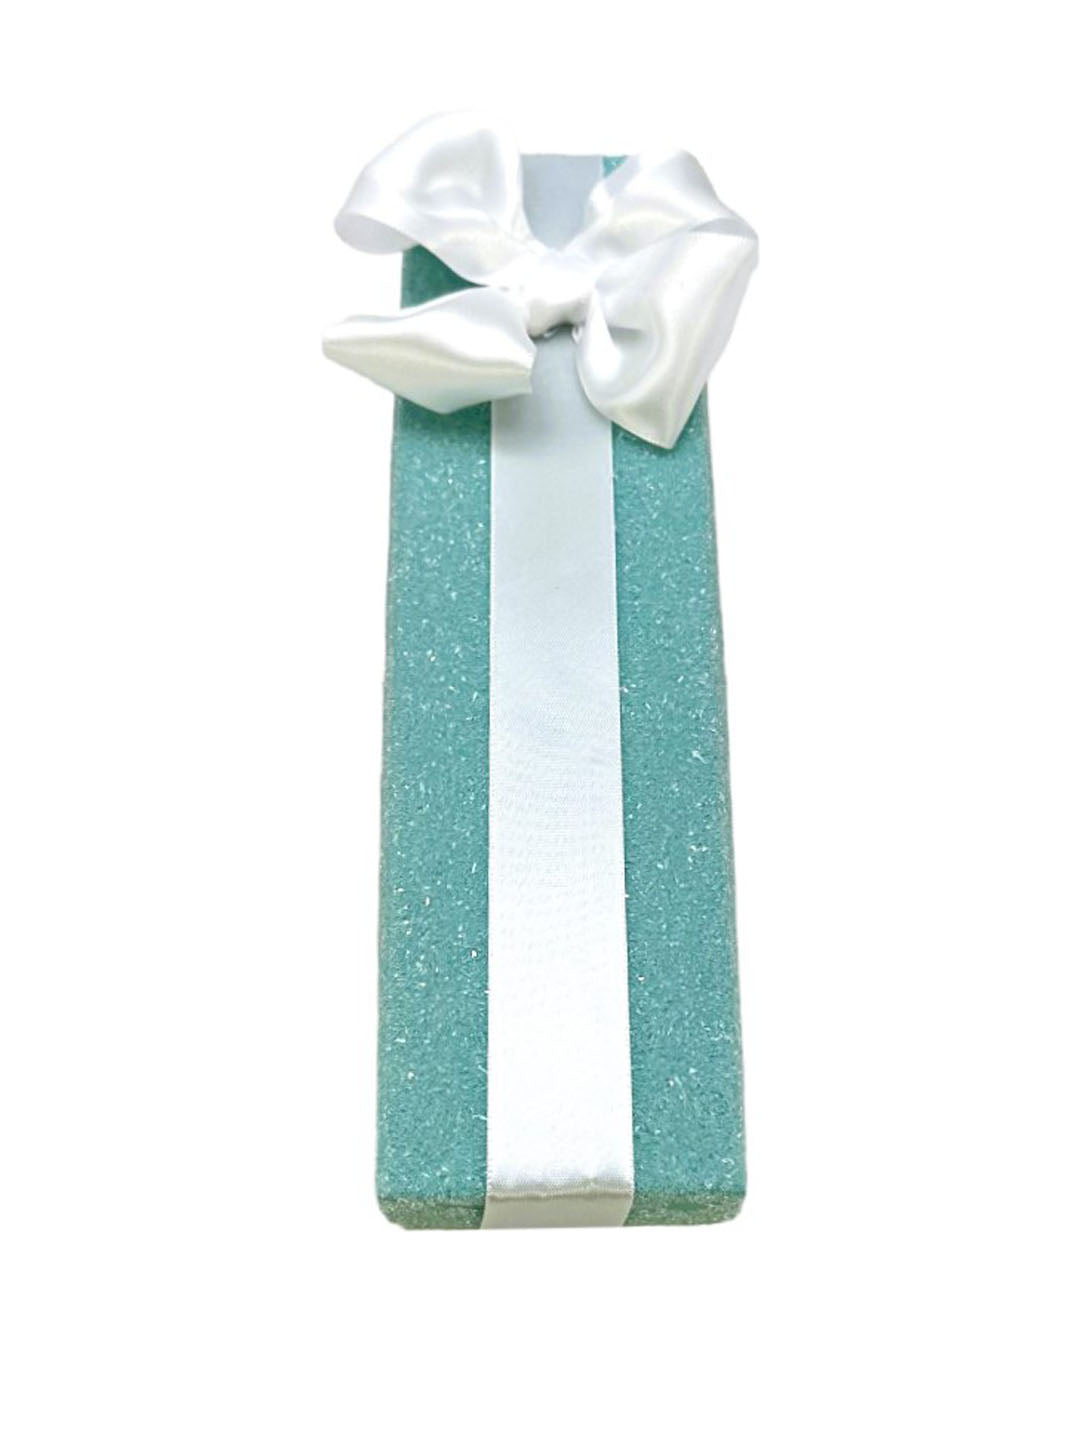 Necklace 2" x 8" Gift Box -Turquoise